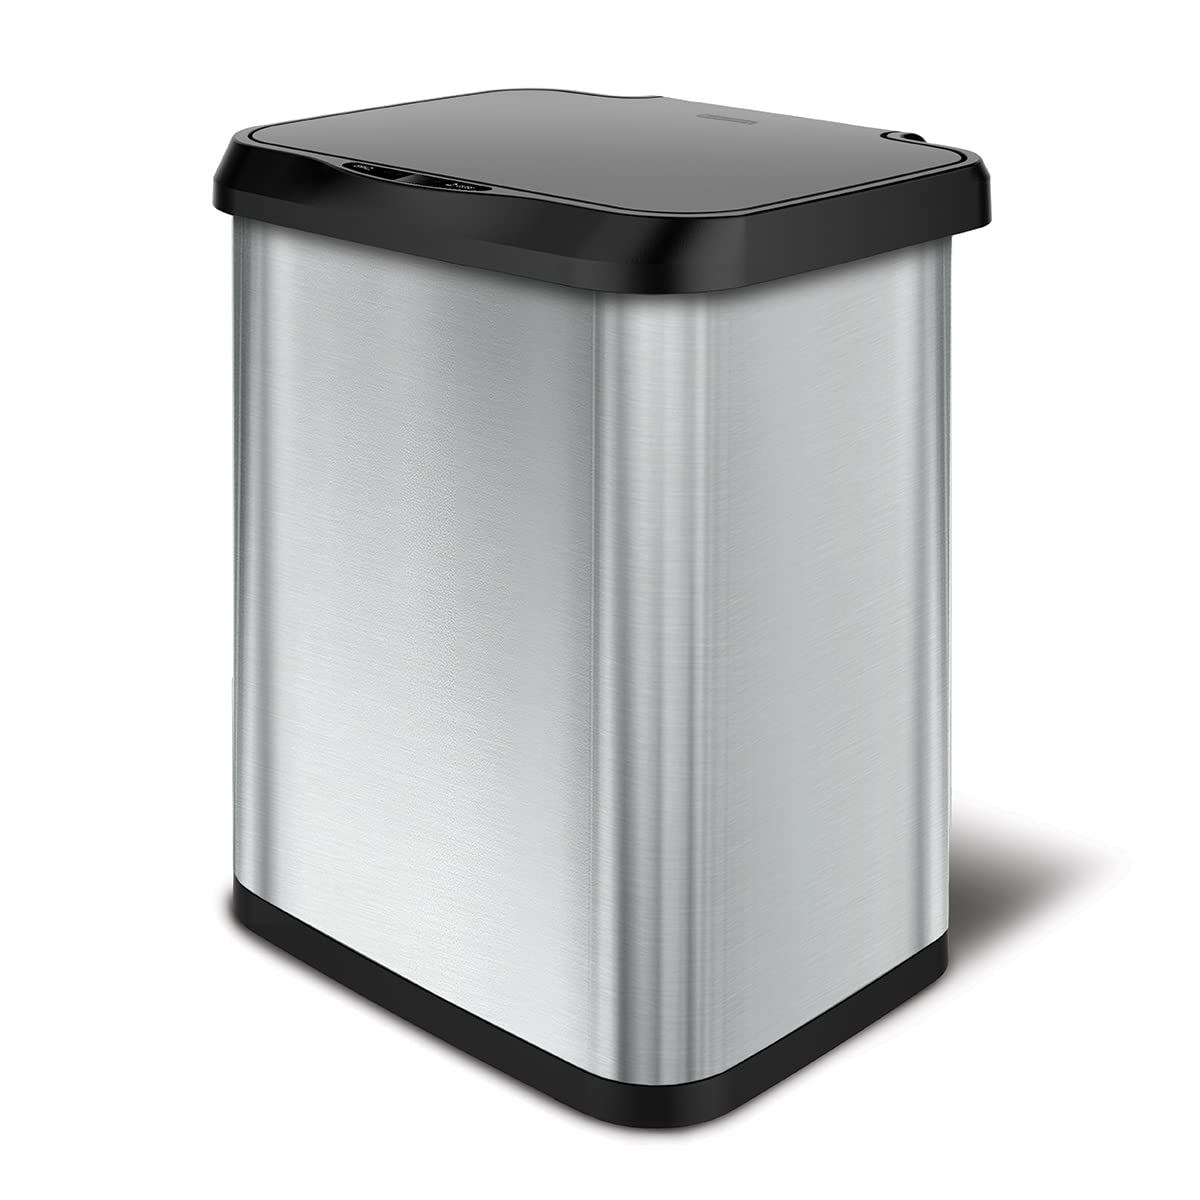 Glad Stainless Steel Trash Cans with Odor Protection | Large Metal Kitchen Garbage Bin with Soft Close Lid and Waste Bag Roll Holder